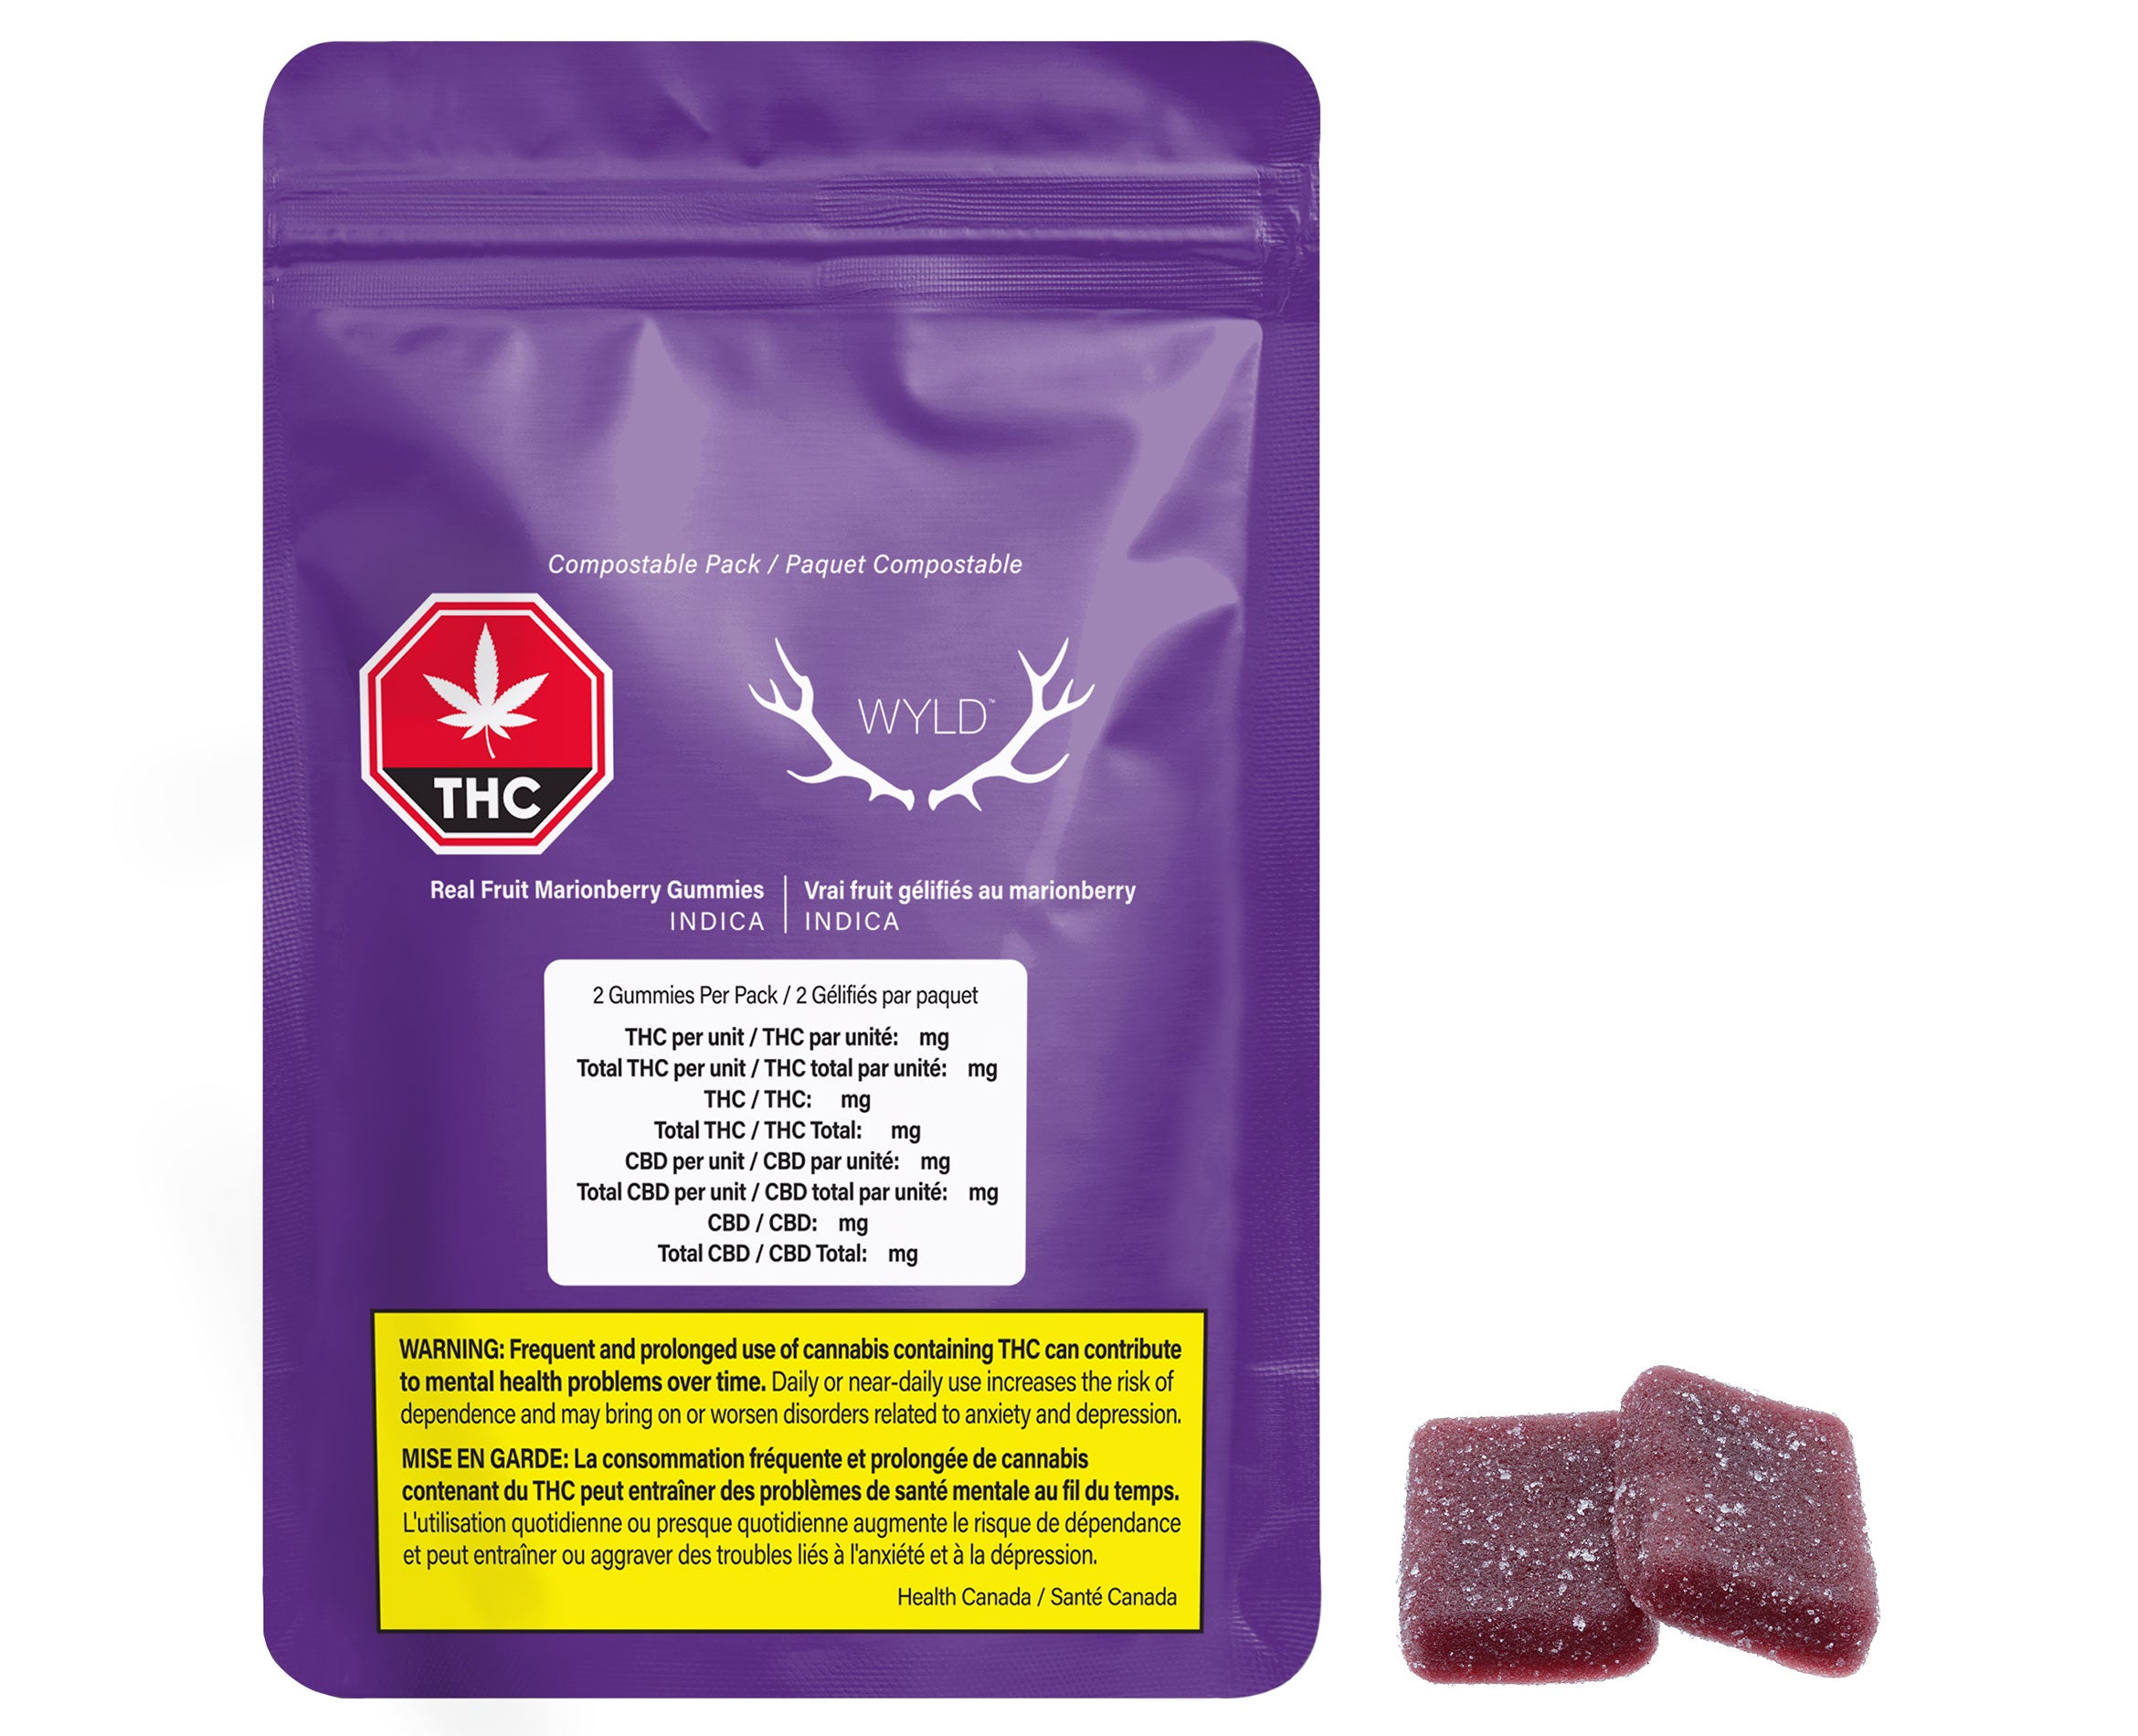 WYLD REAL FRUIT MARIONBERRY (IND) CHEW - 5MG THC X 2